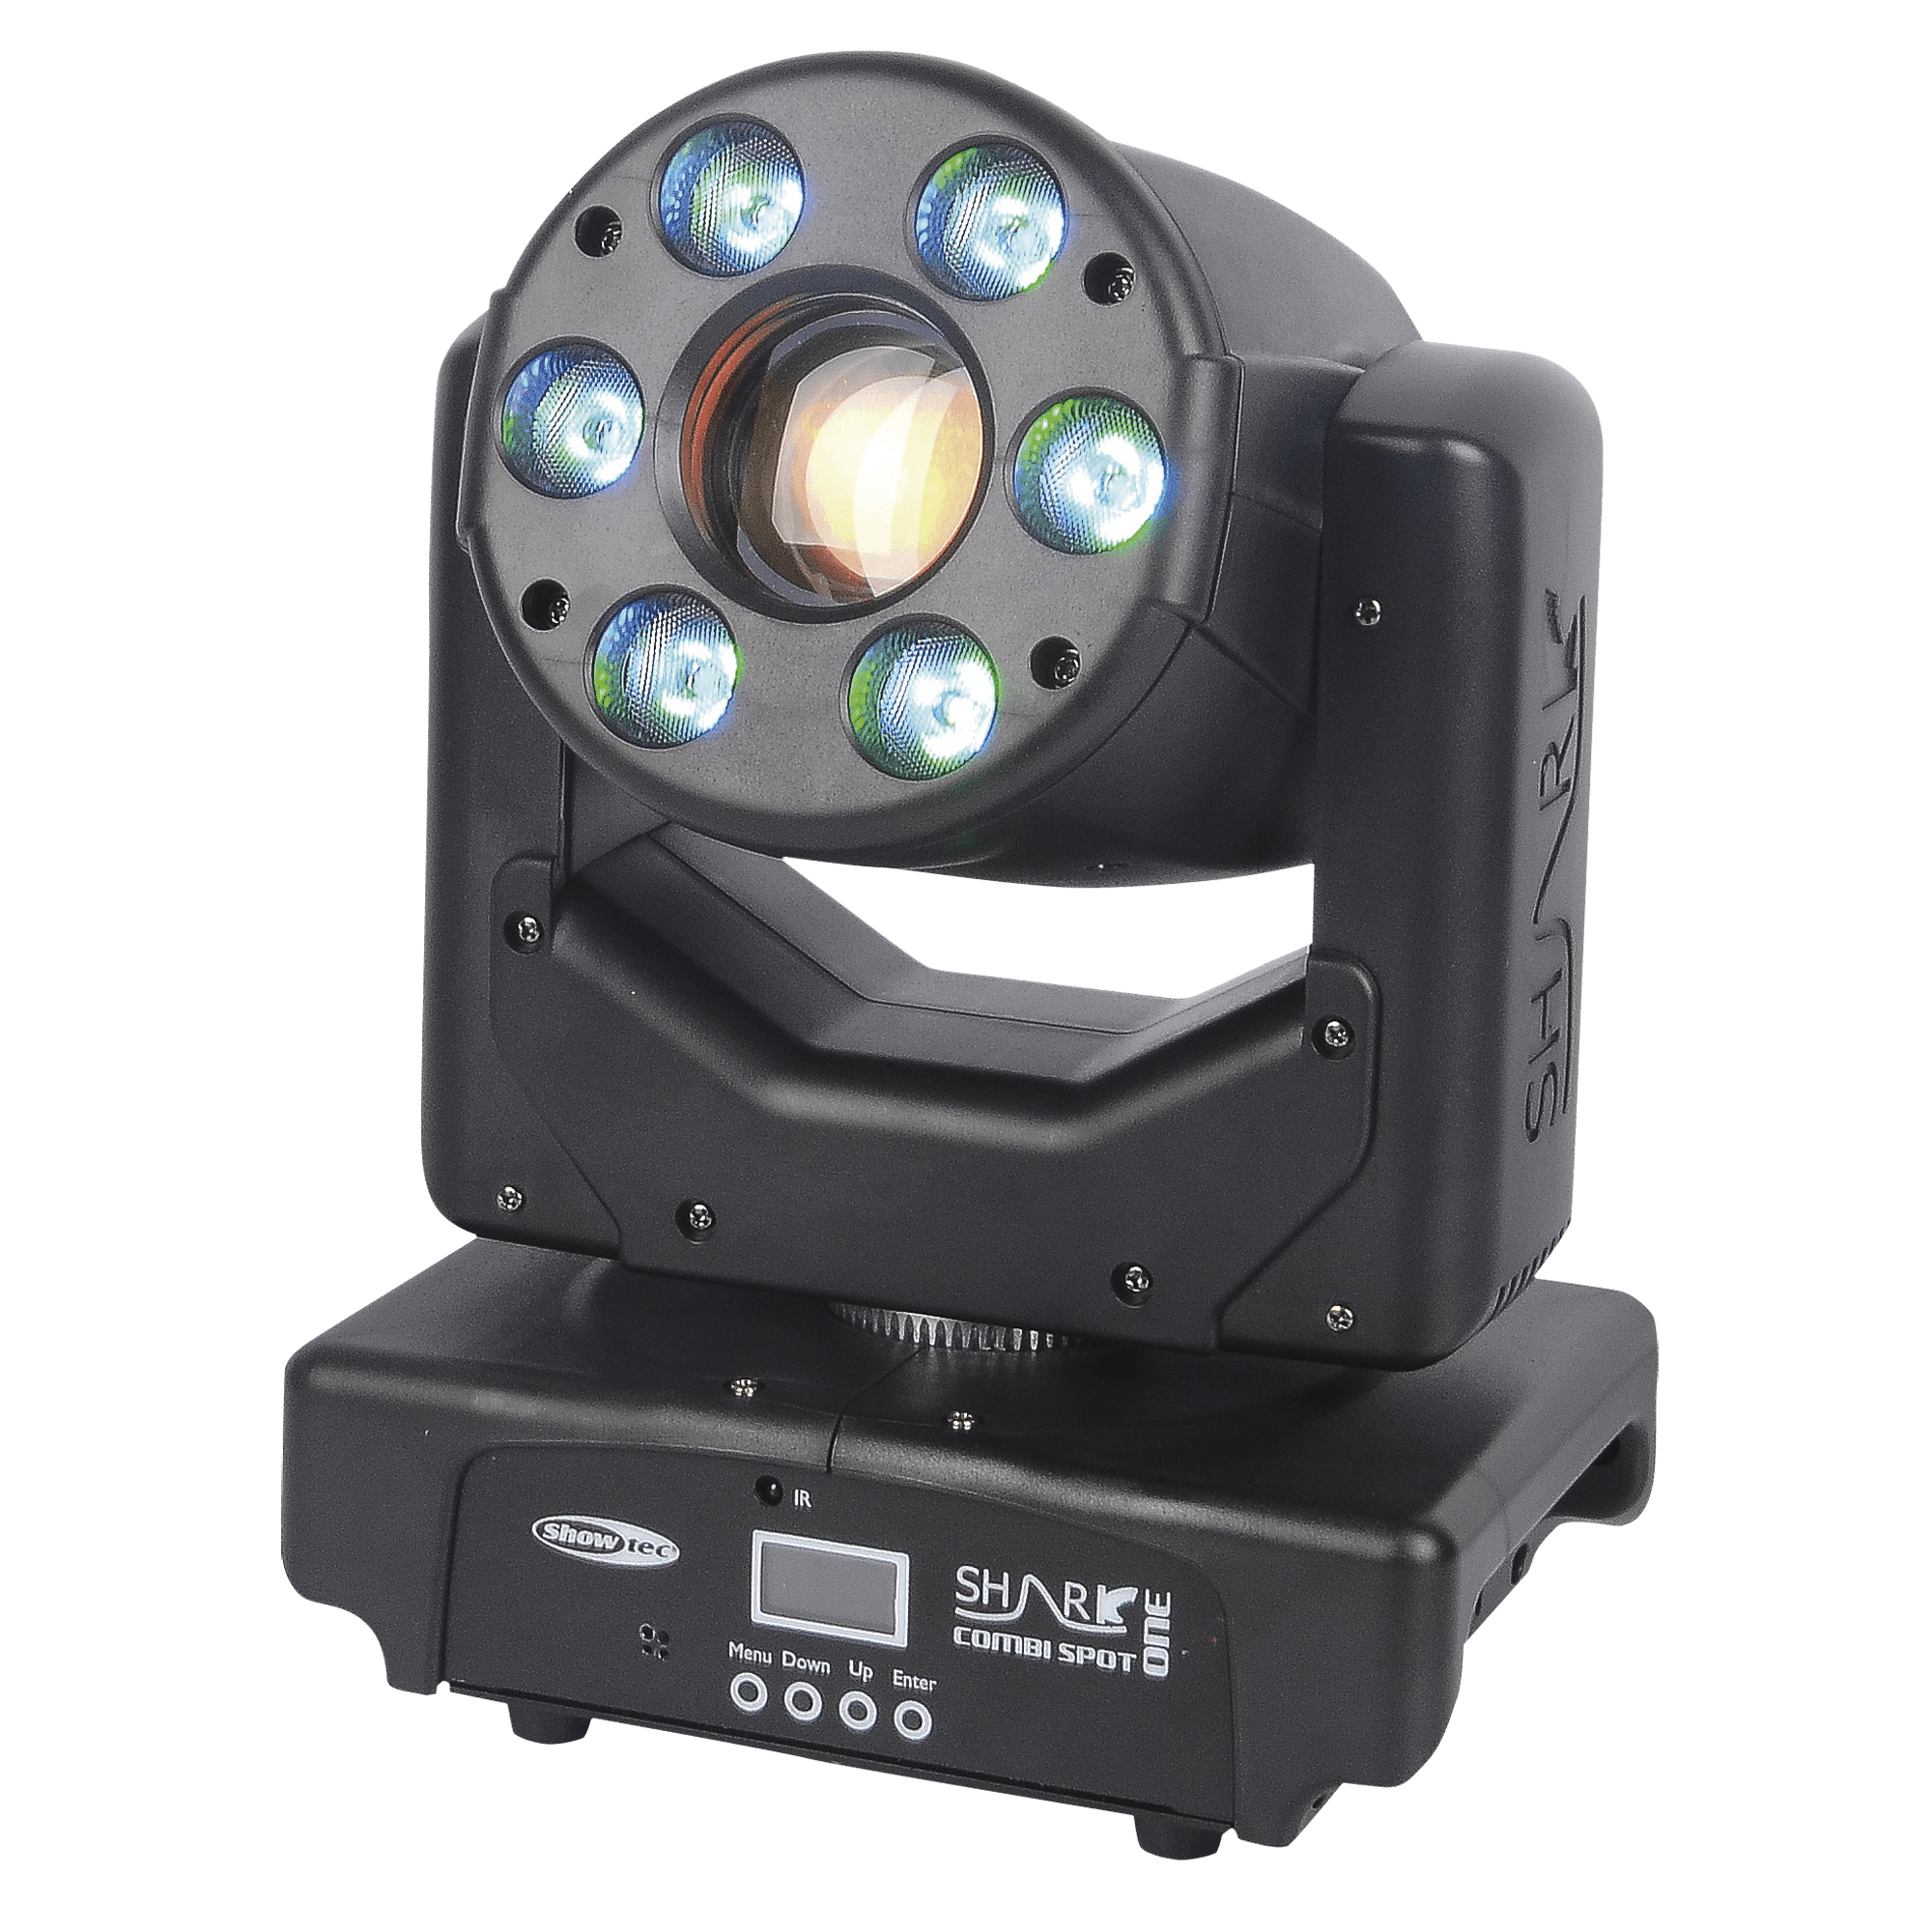 2 x Showtec Shark Combi Spot One 6 x 8 W RGBW LED Wash and Spot Moving Head - DY Pro Audio